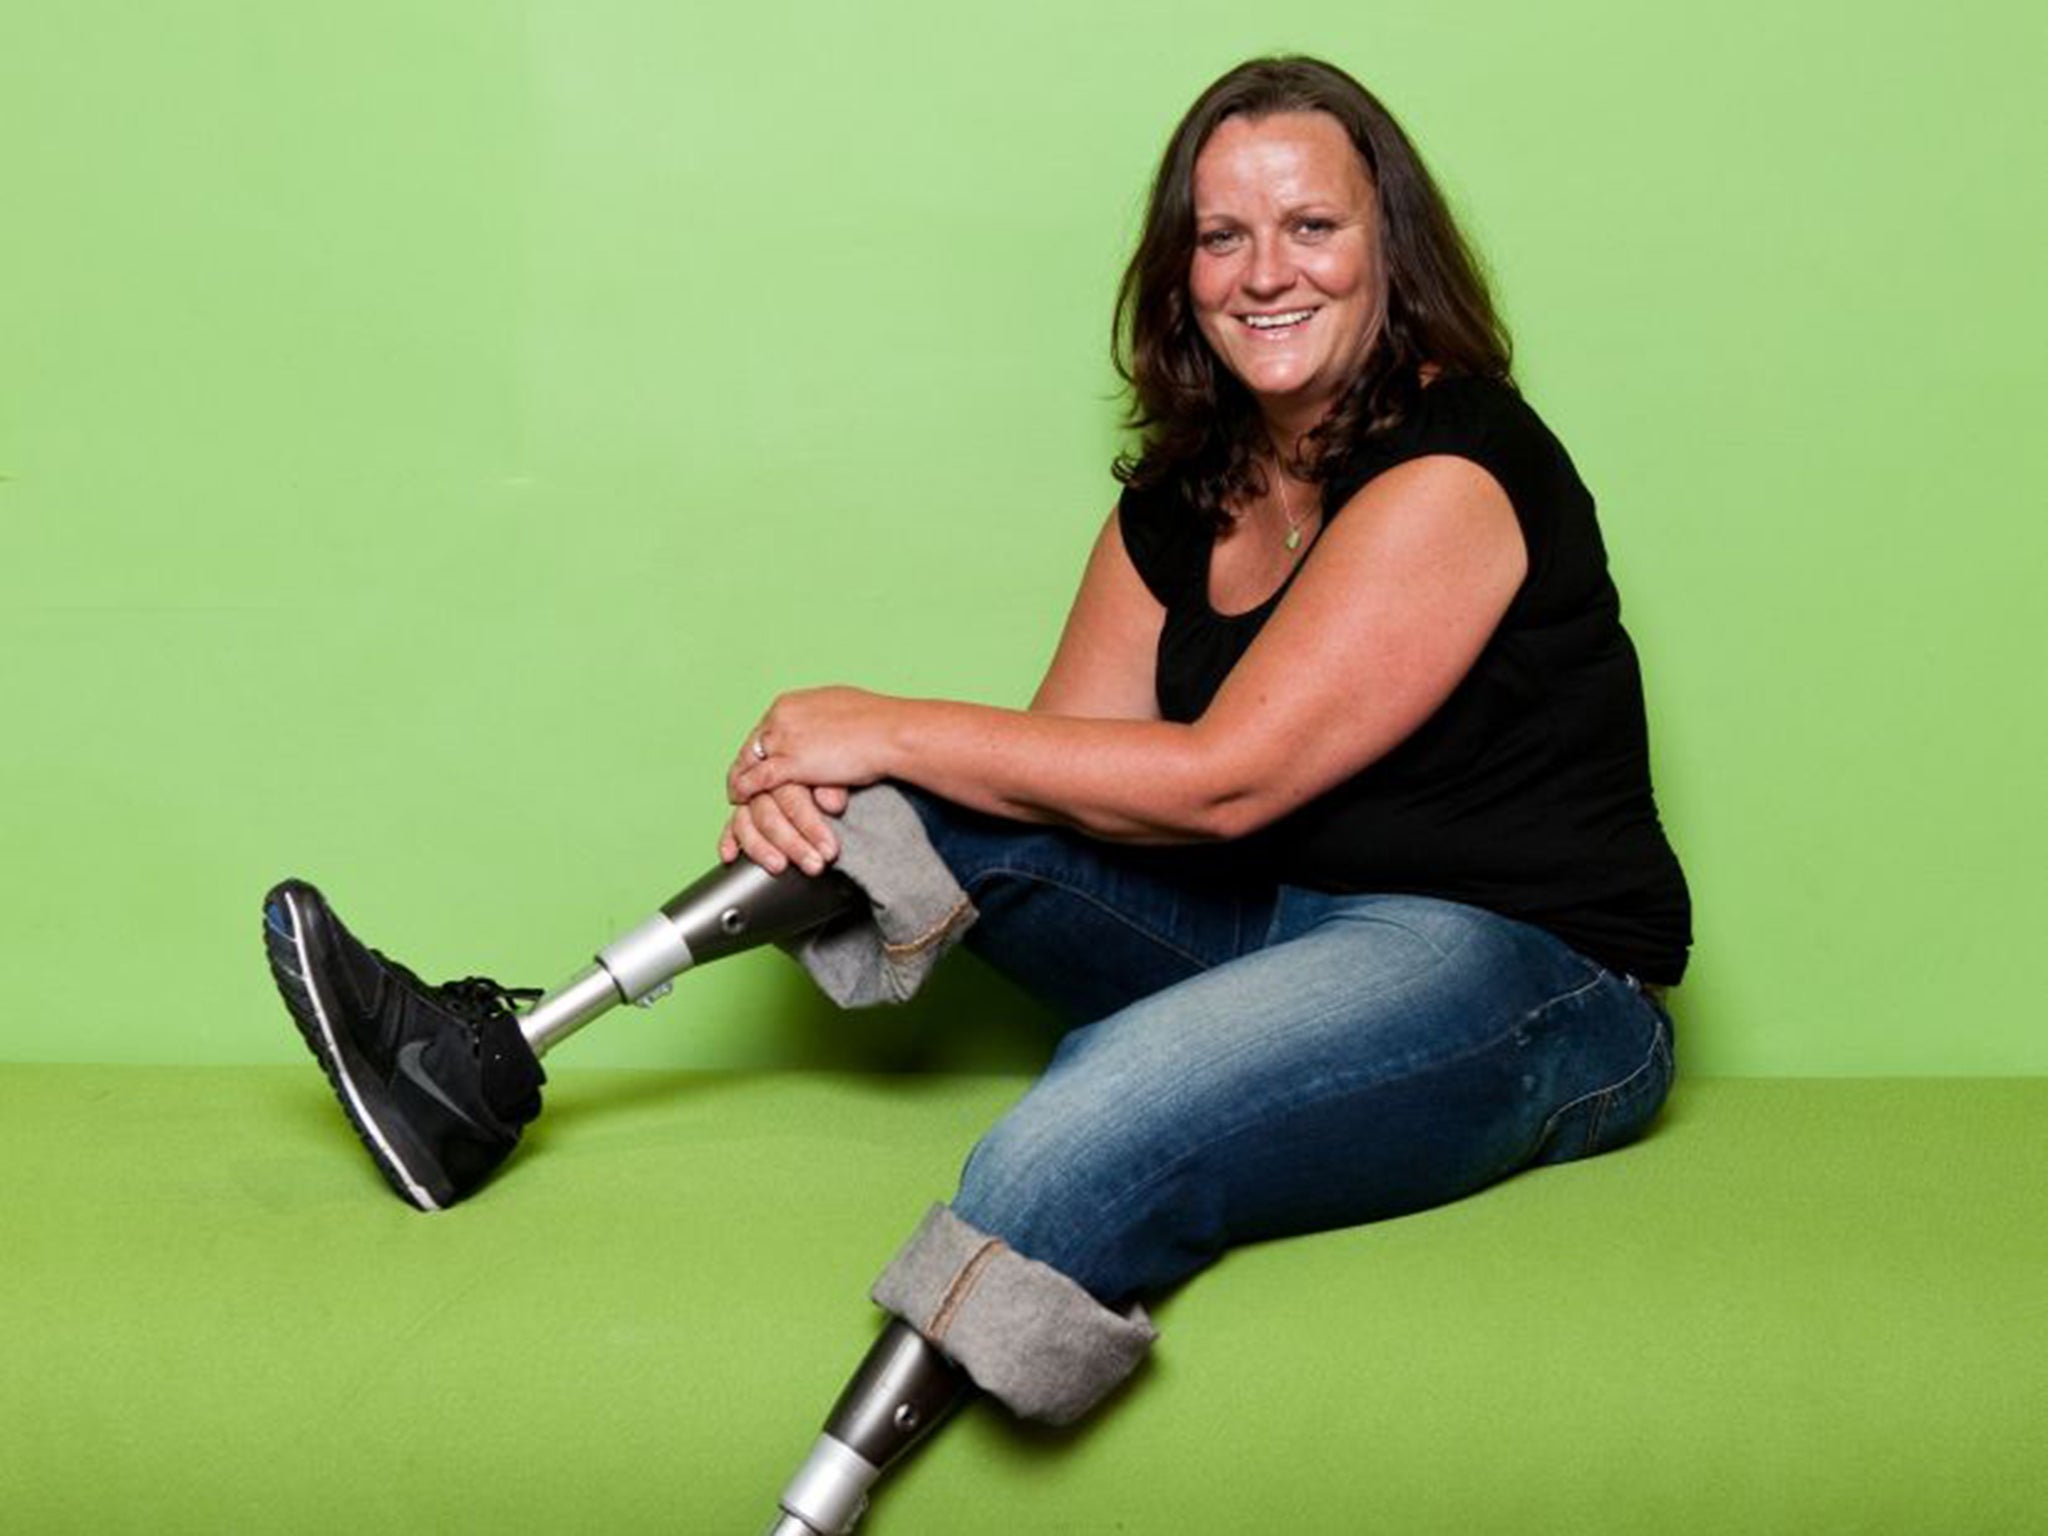 Martine Wright lost both of her legs in the July 7 London bombings, which killed 52 people and injured more than 770